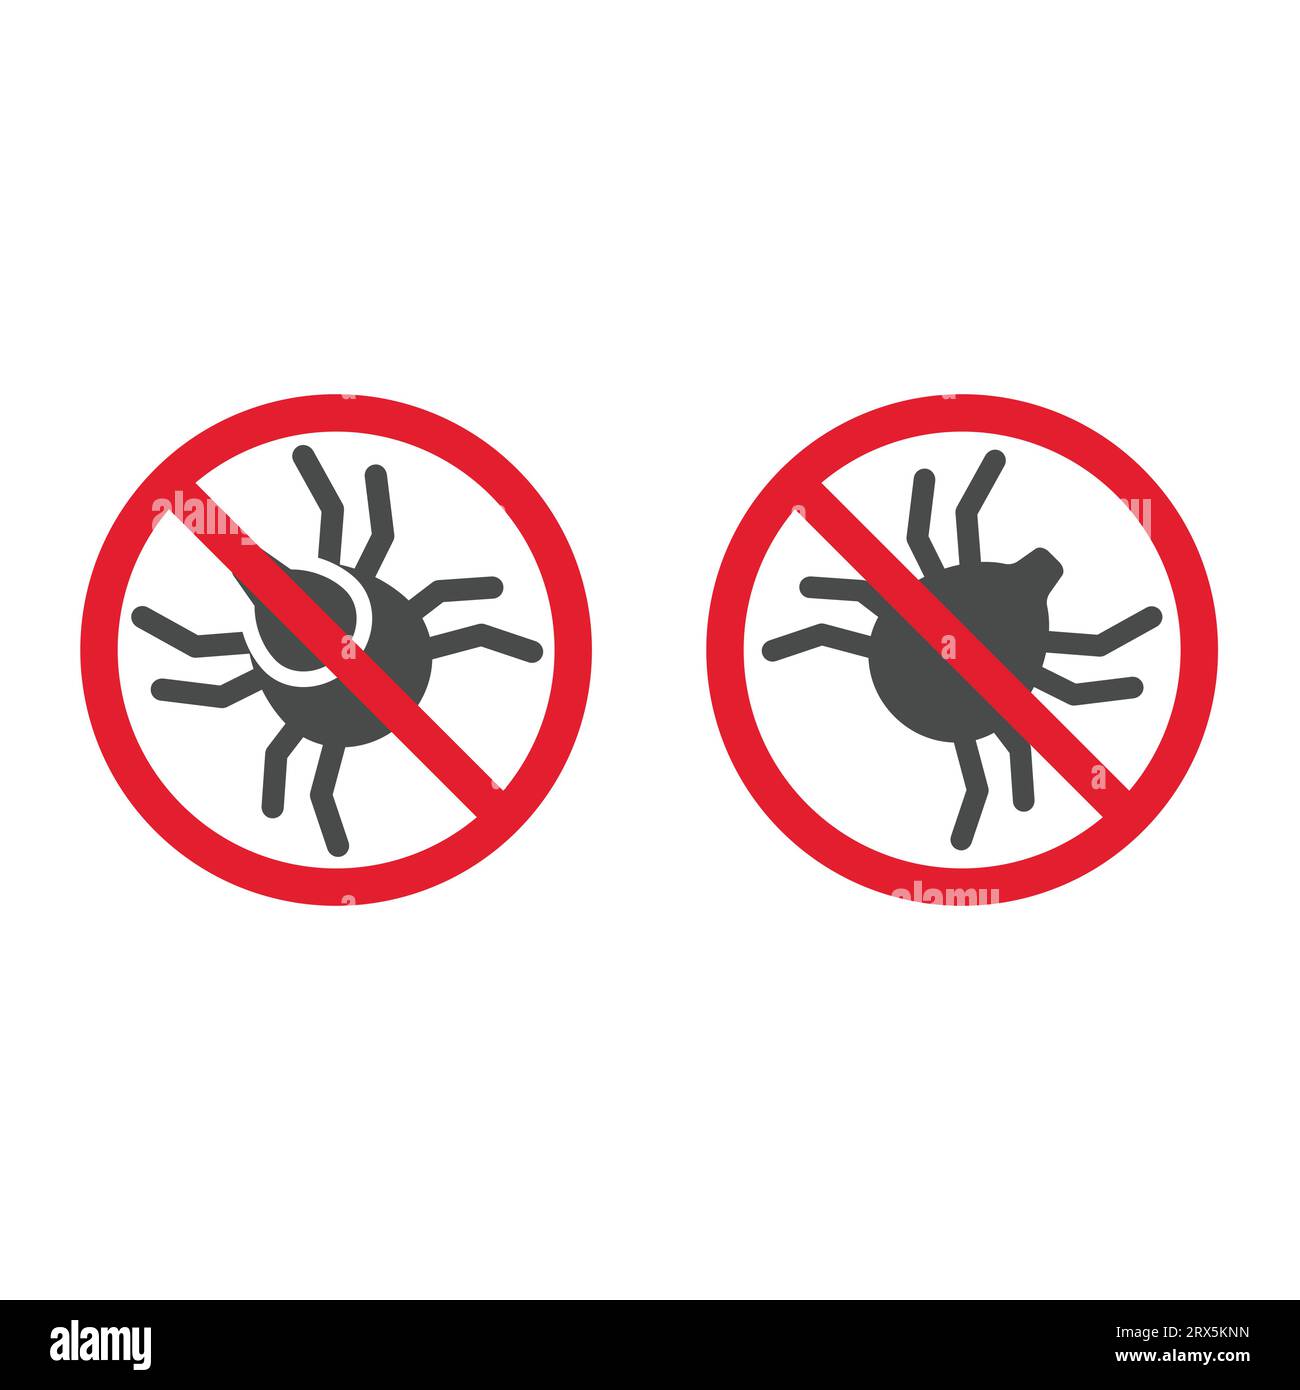 No mite or tick vector icon sign. Repellent for insects, mites and ticks symbol. Stock Vector